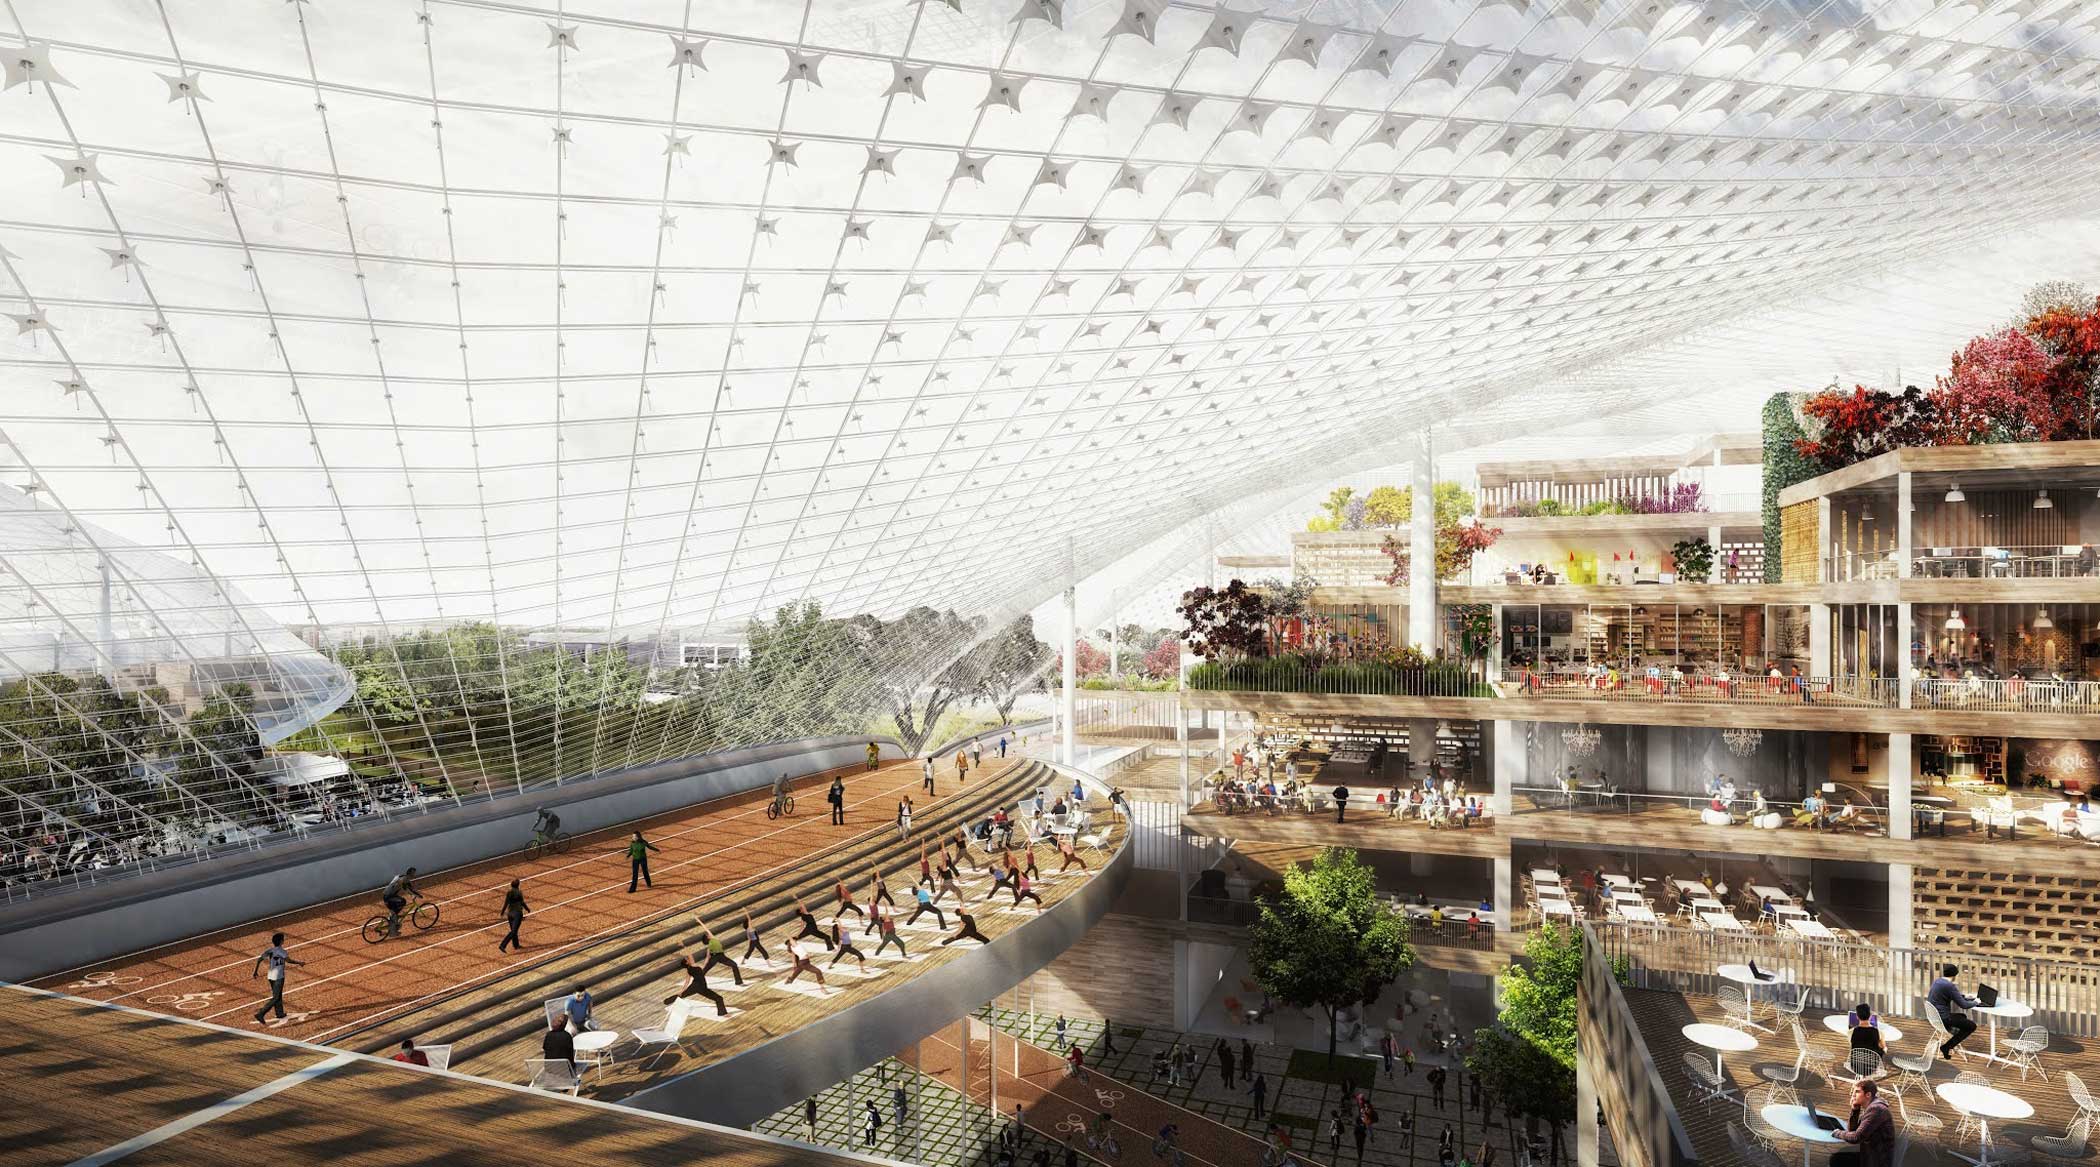 Google Mountain View, Calif., Google wants to add bike paths and retail space to better integrate with the surrounding community.